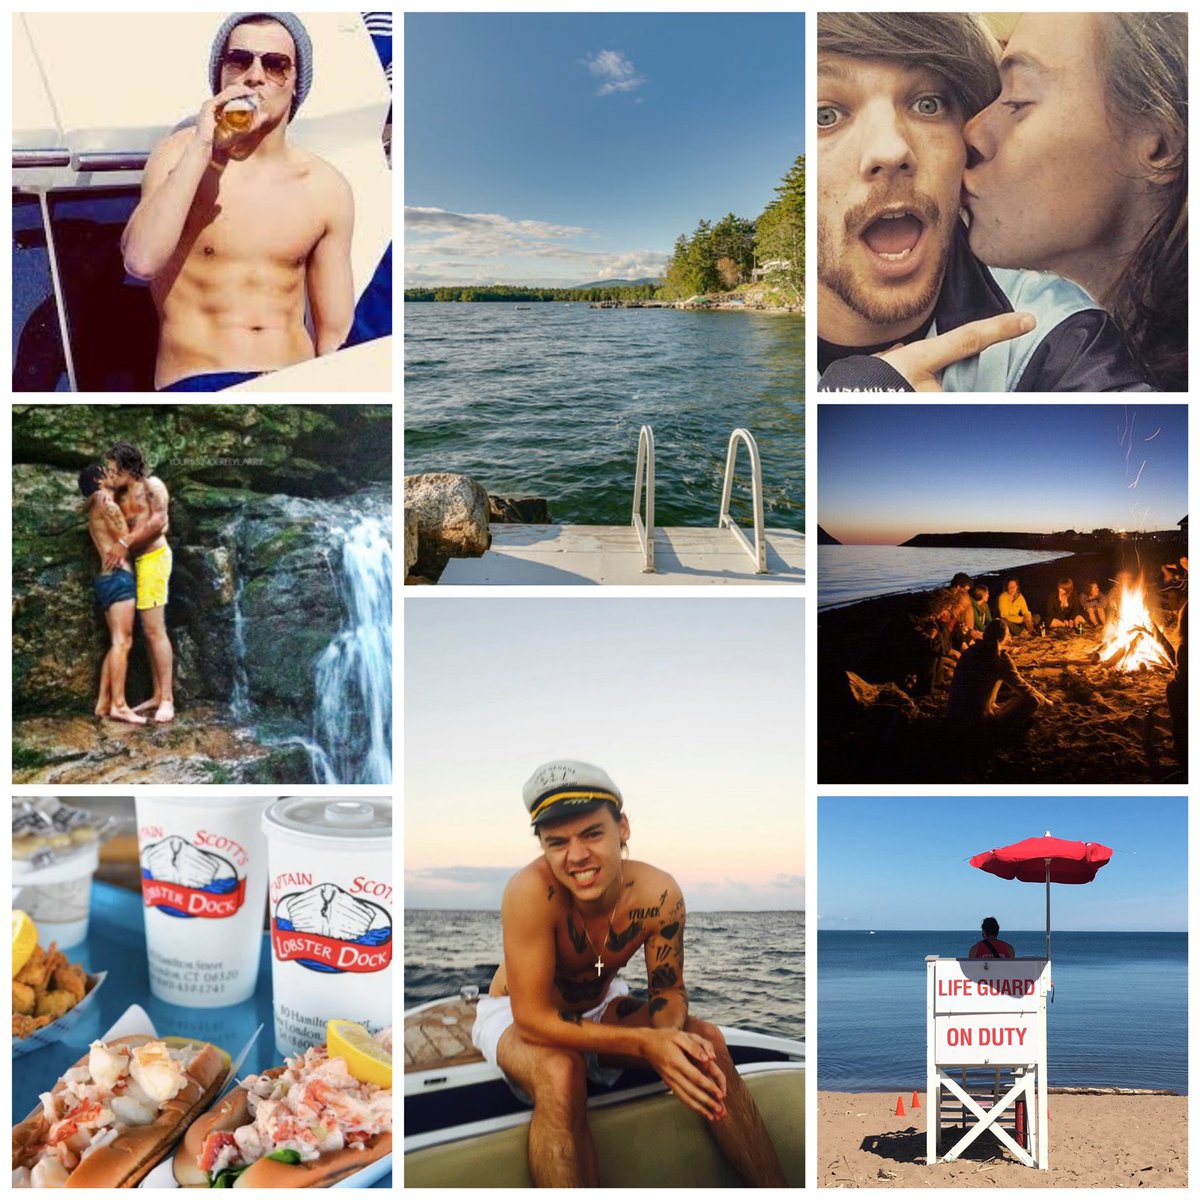 The Recklessness In Water: summer romance AU, hate to love, lifeguard Harry, unemployed/lost Louis, humor, flirting, ft. Harry’s yellow shorts, light angst, eventual smut  https://archiveofourown.org/works/20960945/chapters/49837268